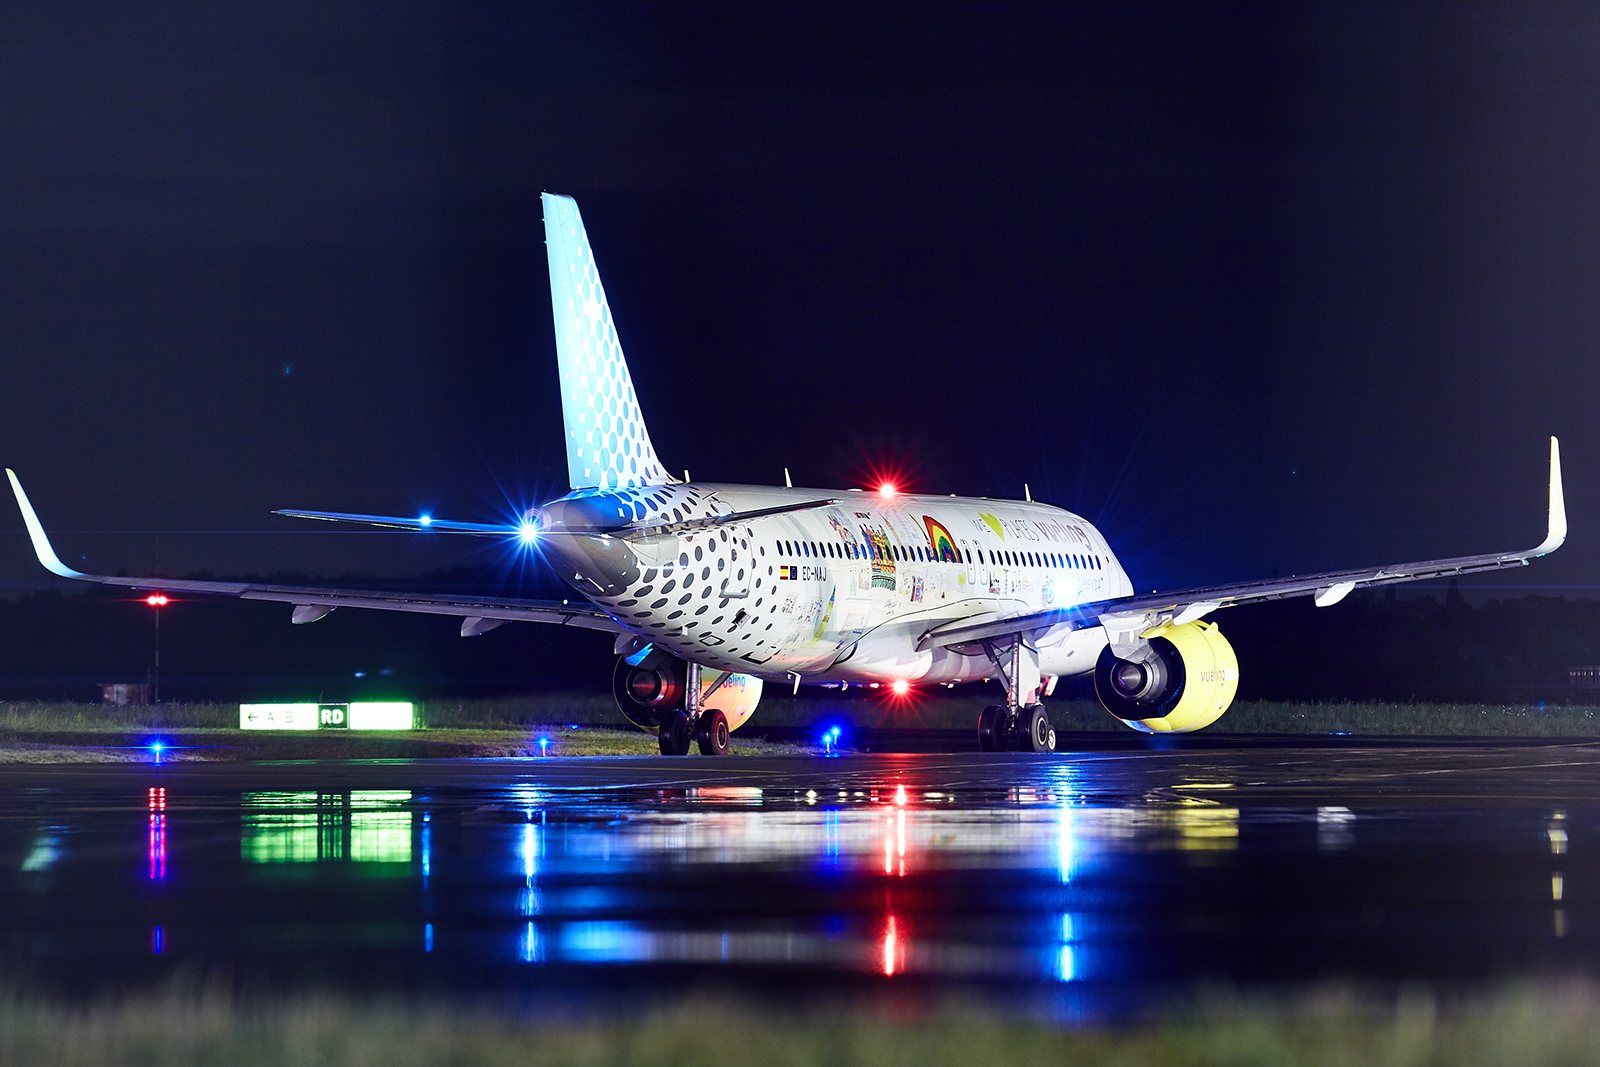 [25/04/2019] A320neo (EC-NAJ) Vueling "We love places" livery 1904261132285493216213143